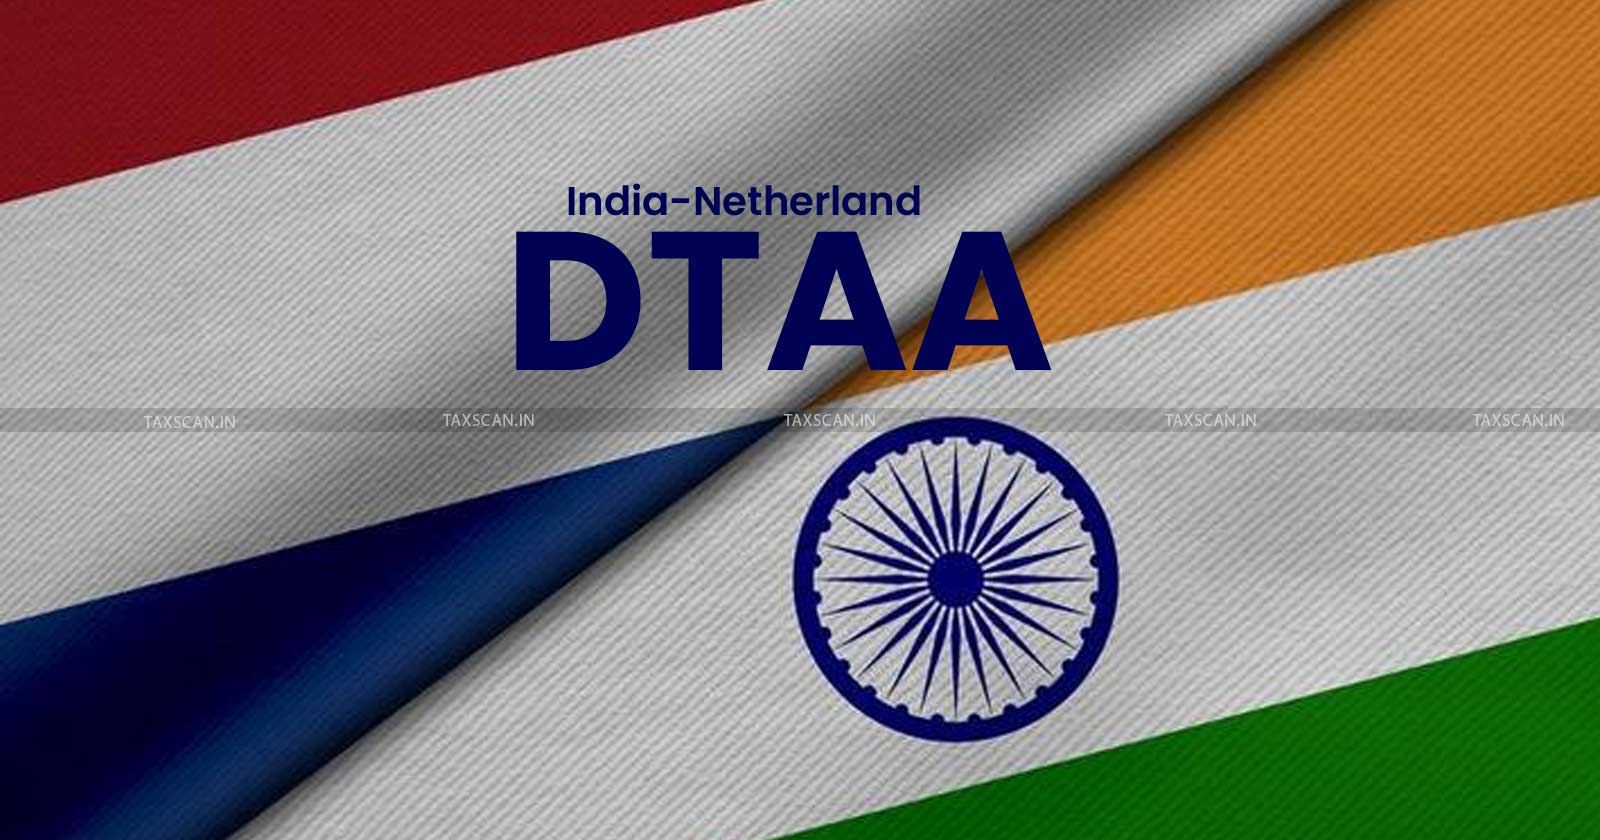 ITAT - ITAT Delhi - DTAA - India Netherlands DTAA - Income Tax - Fee For Technical Service - FTS under India Netherlands DTAA - TAXSCAN